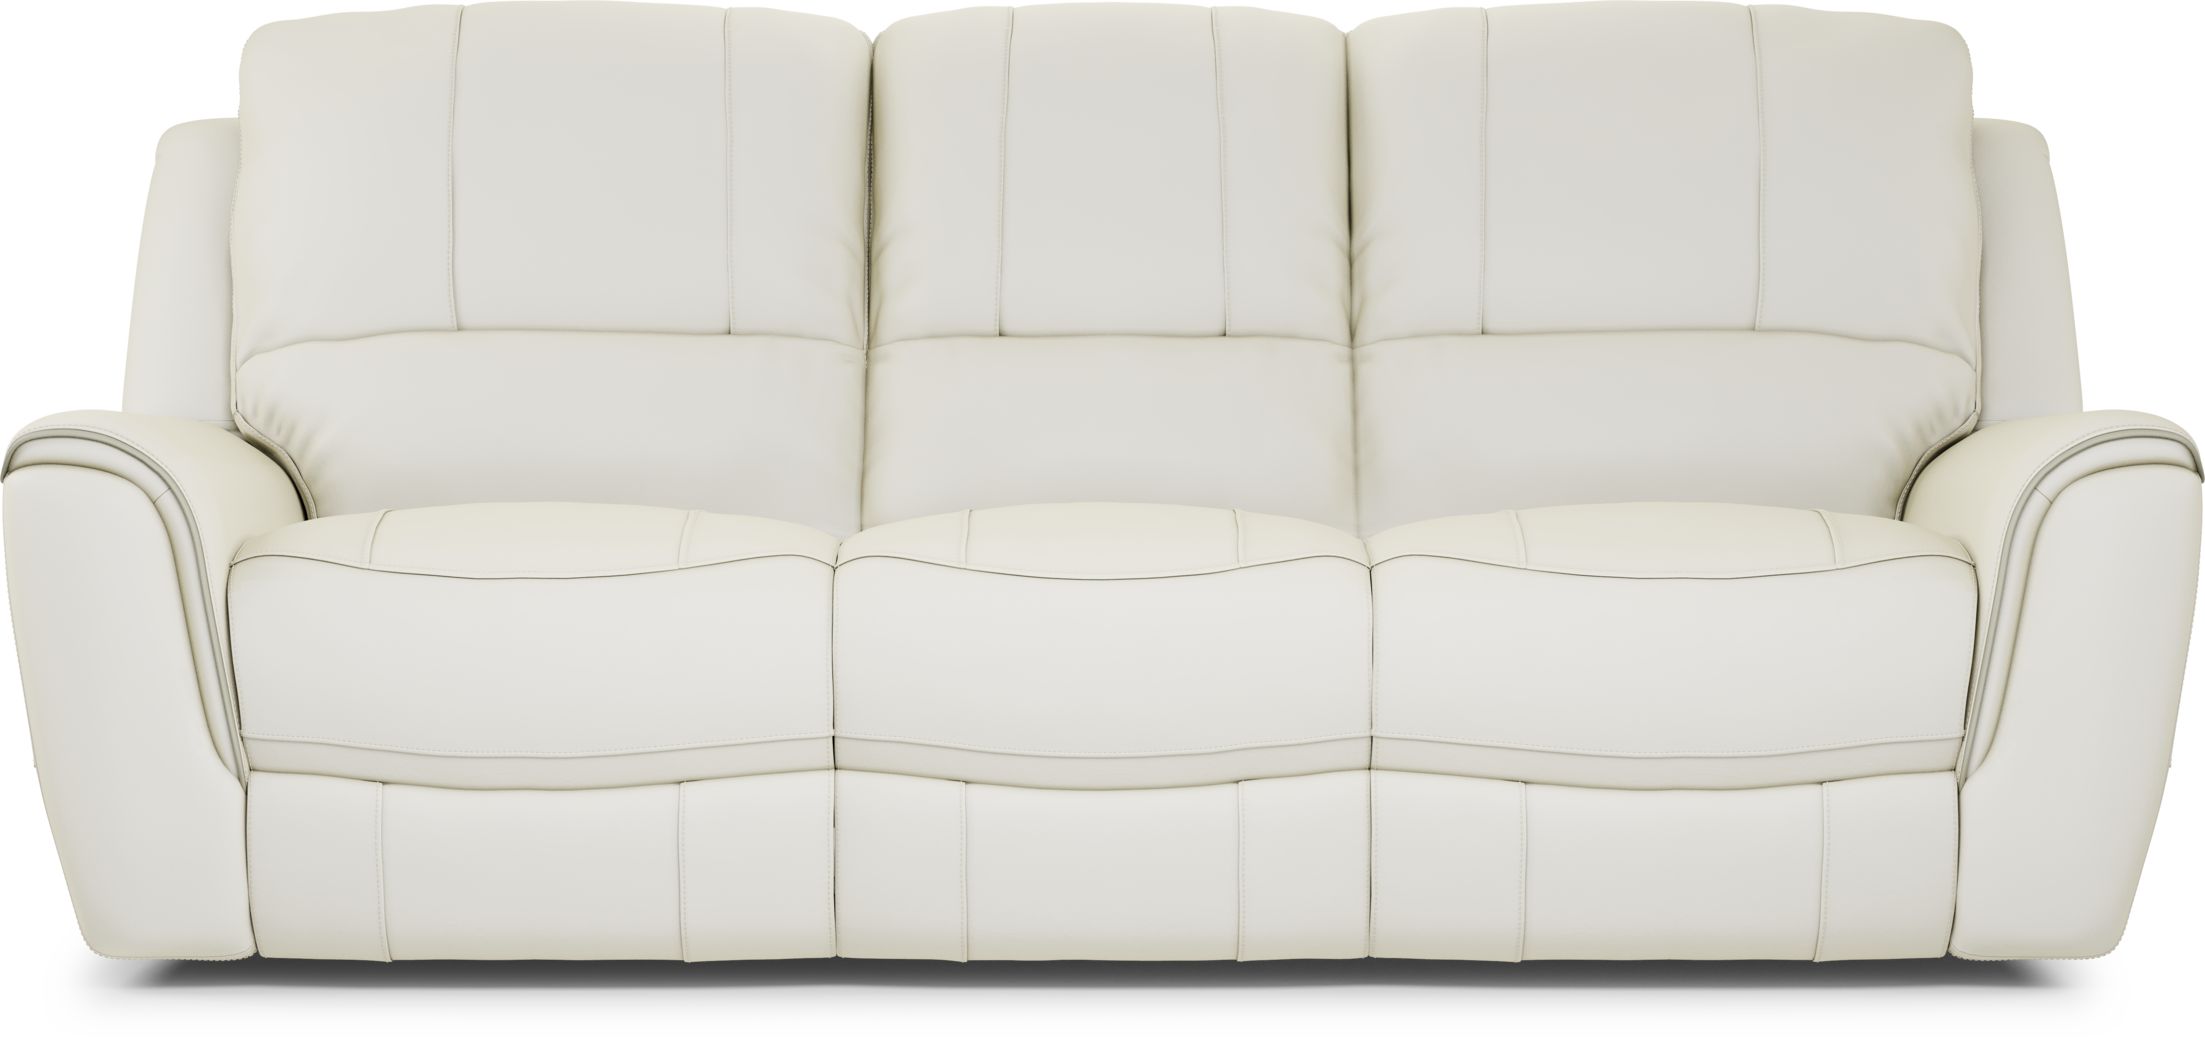 rooms to go white leather sofa